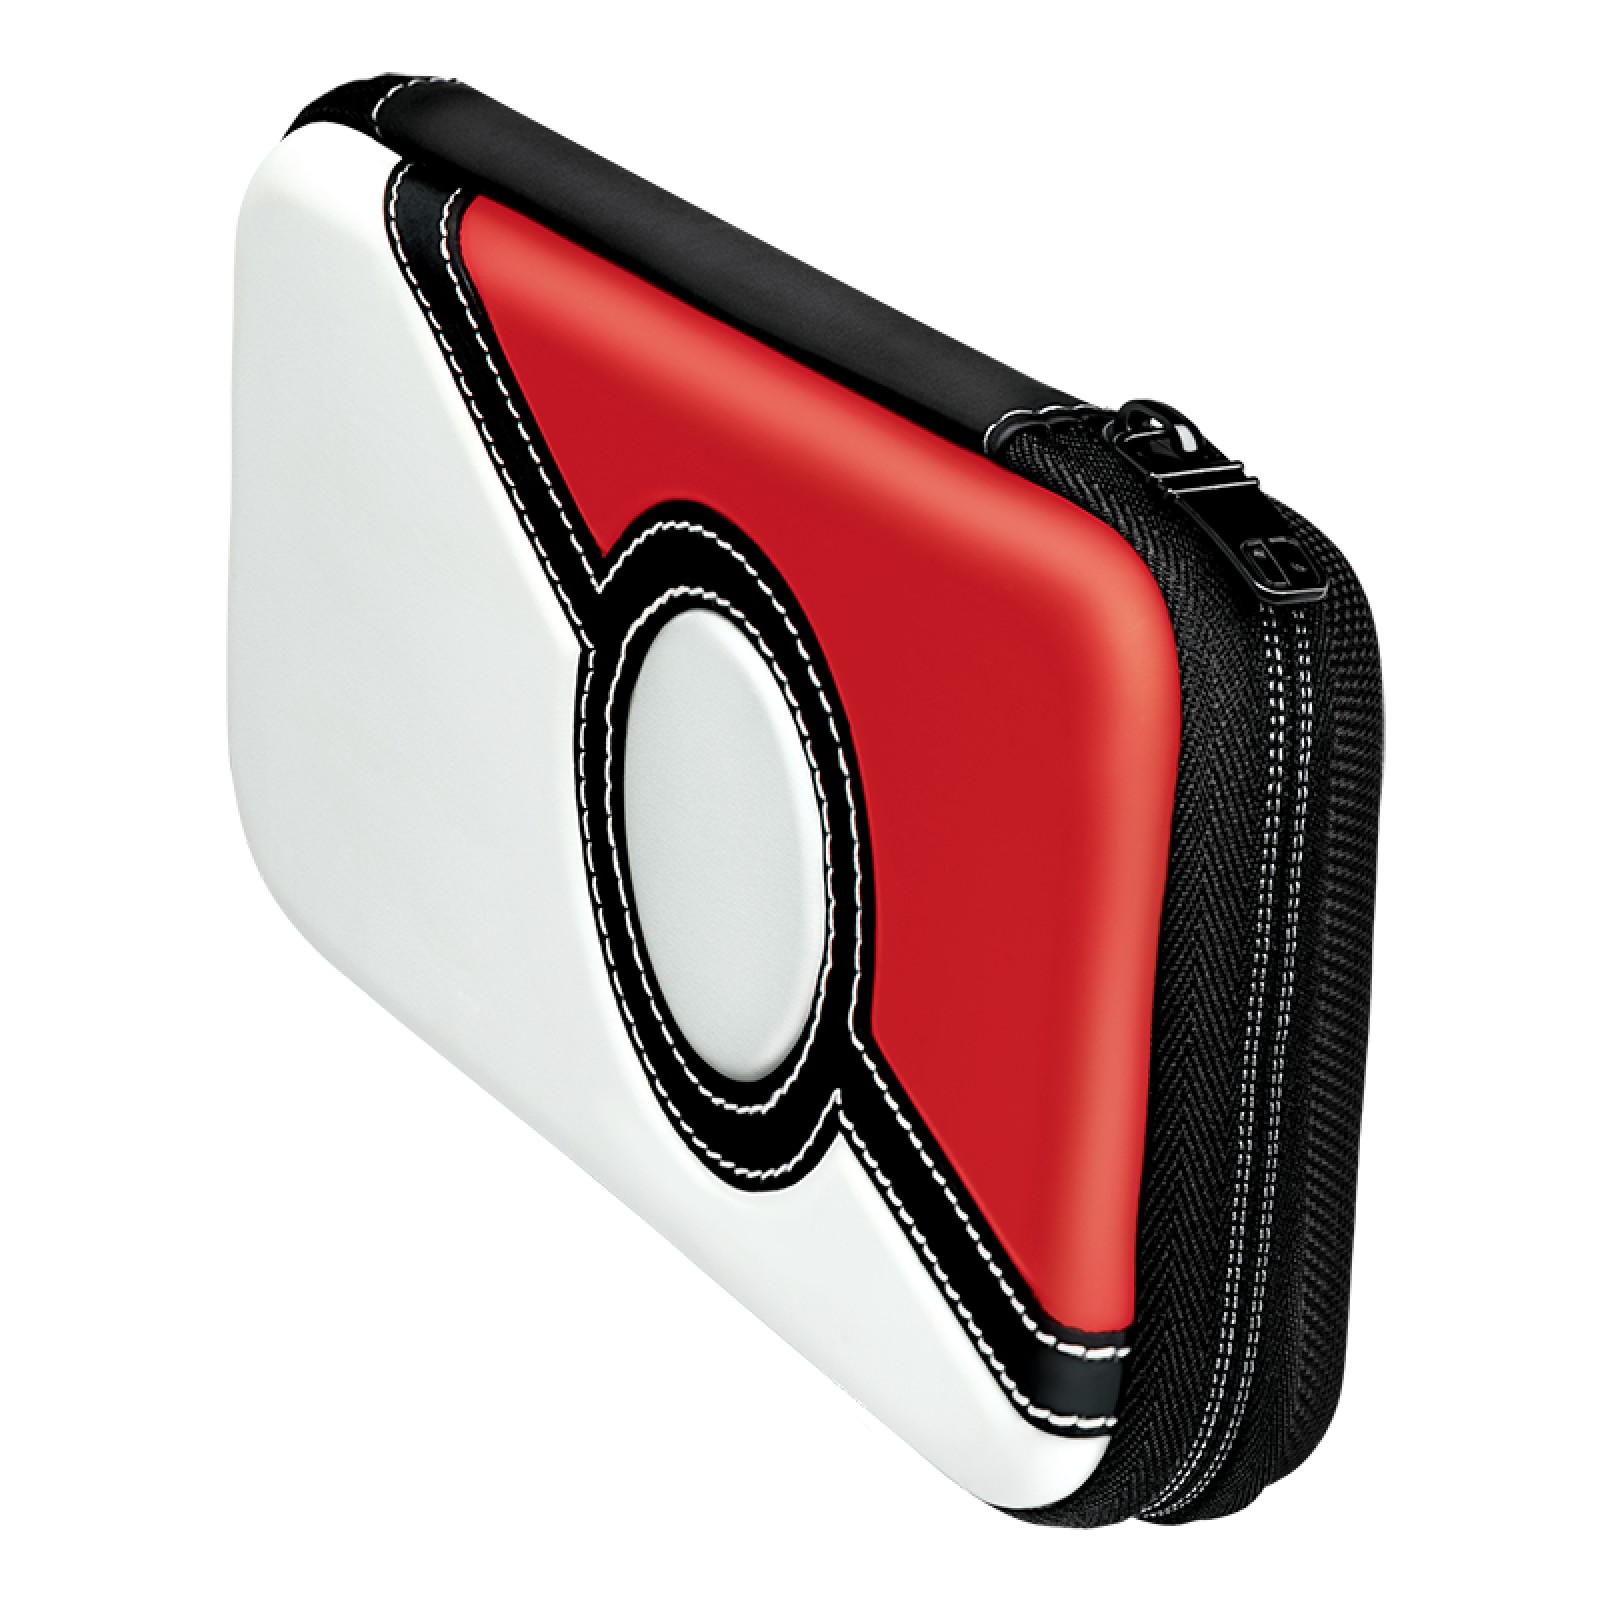 PDP Slim Travel Case - Poke Ball Edition For Nintendo Switch